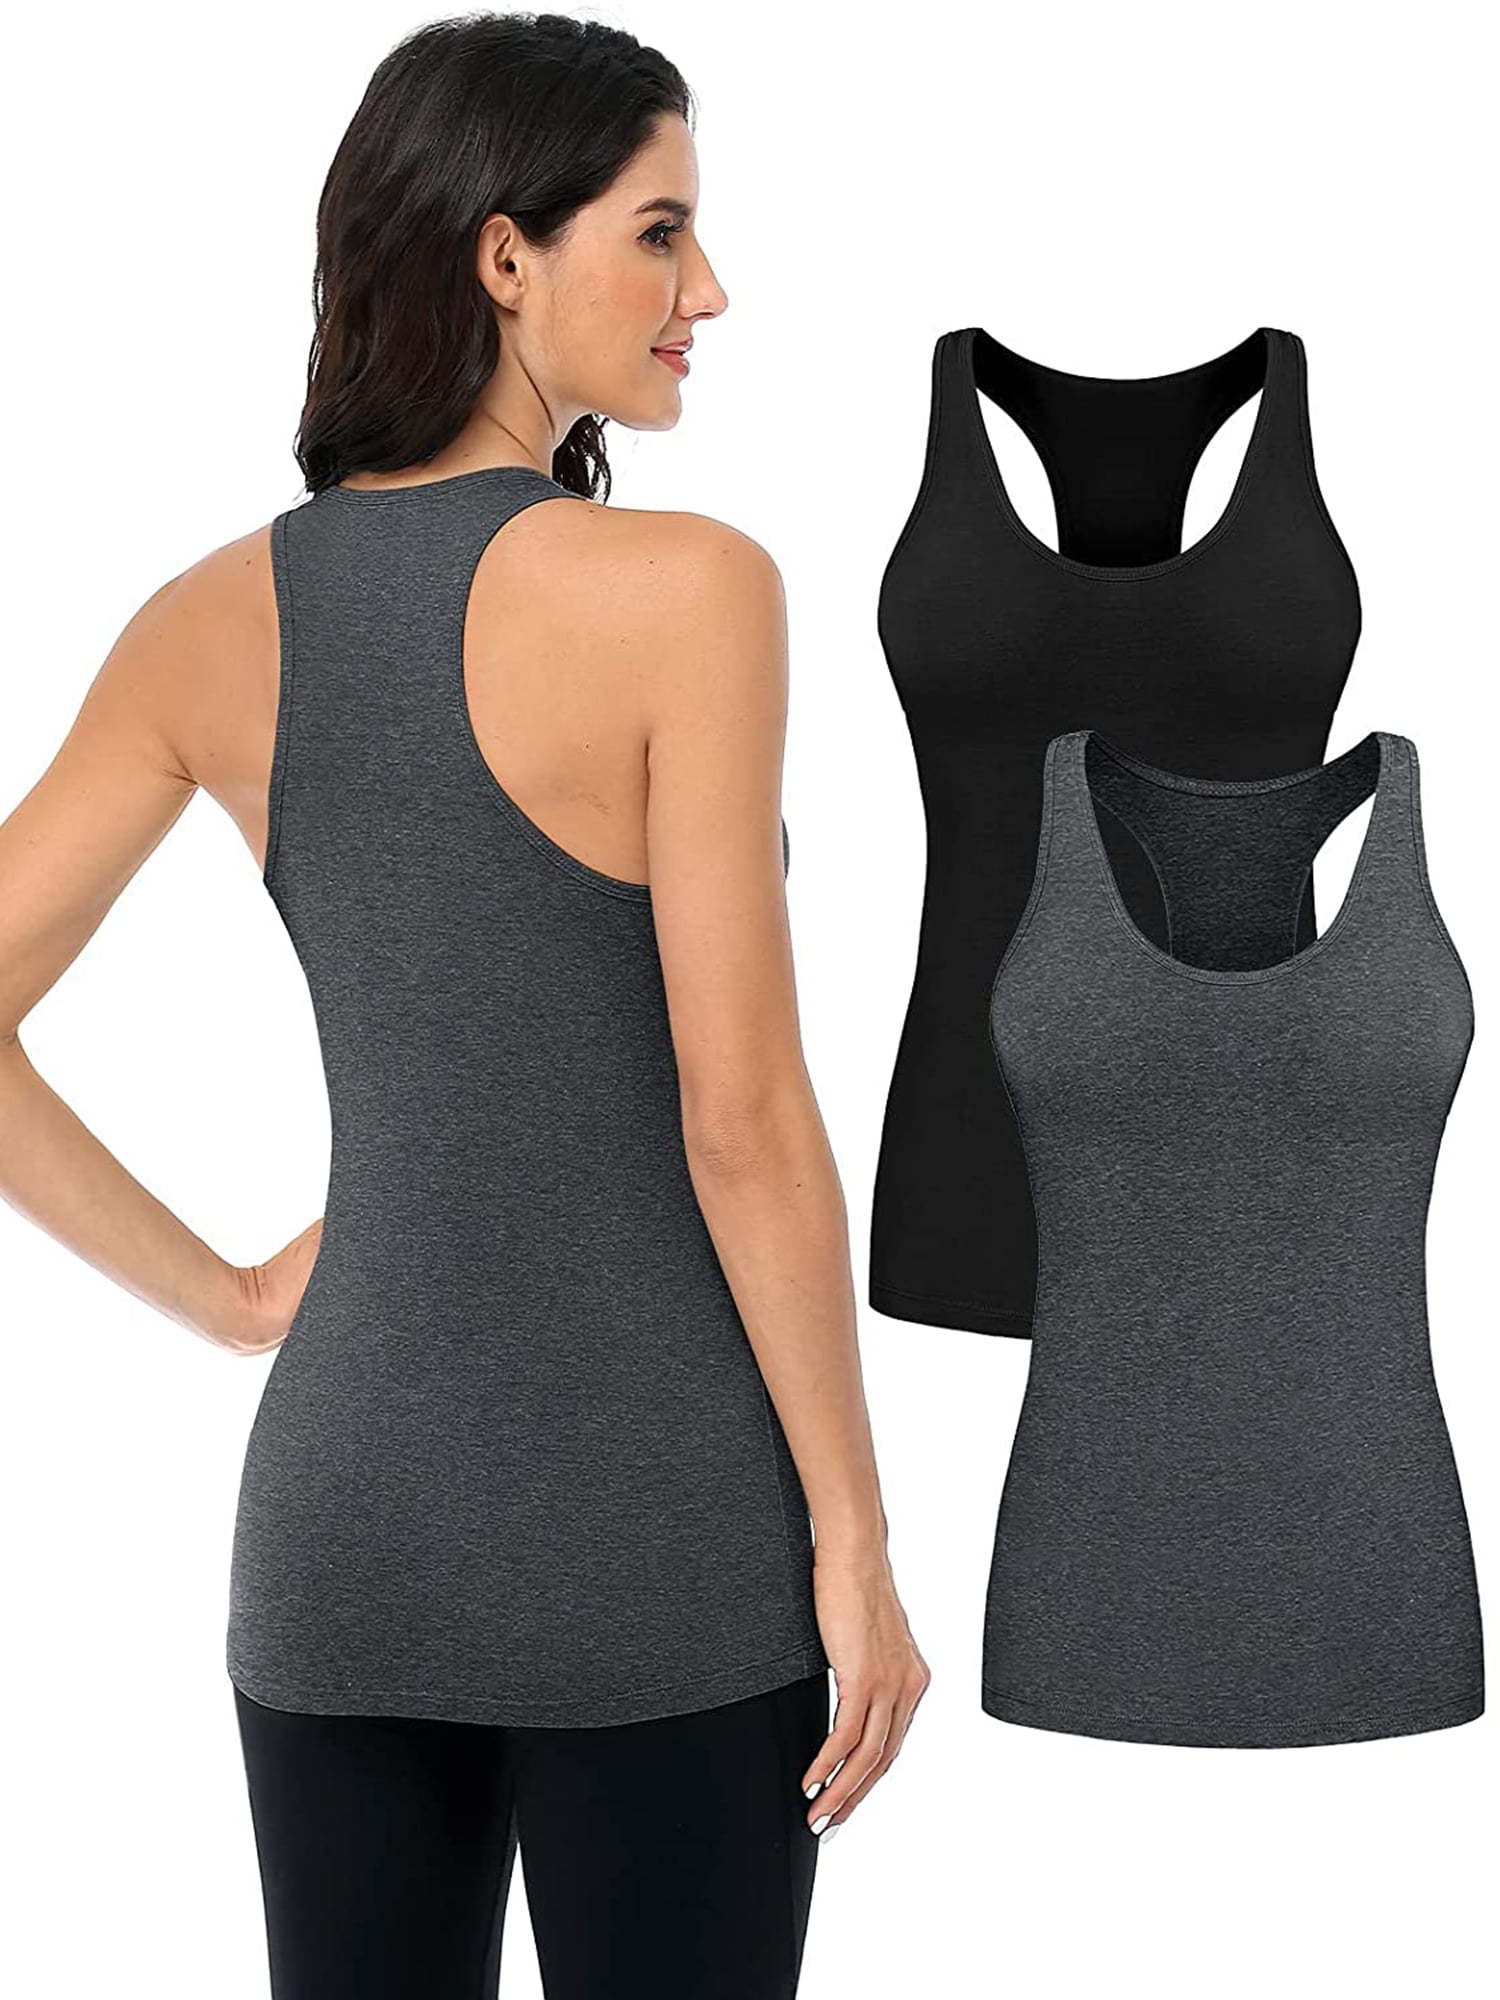 As Rose Rich Workout Tops for Women Racerback Yoga Tank Tops, XL